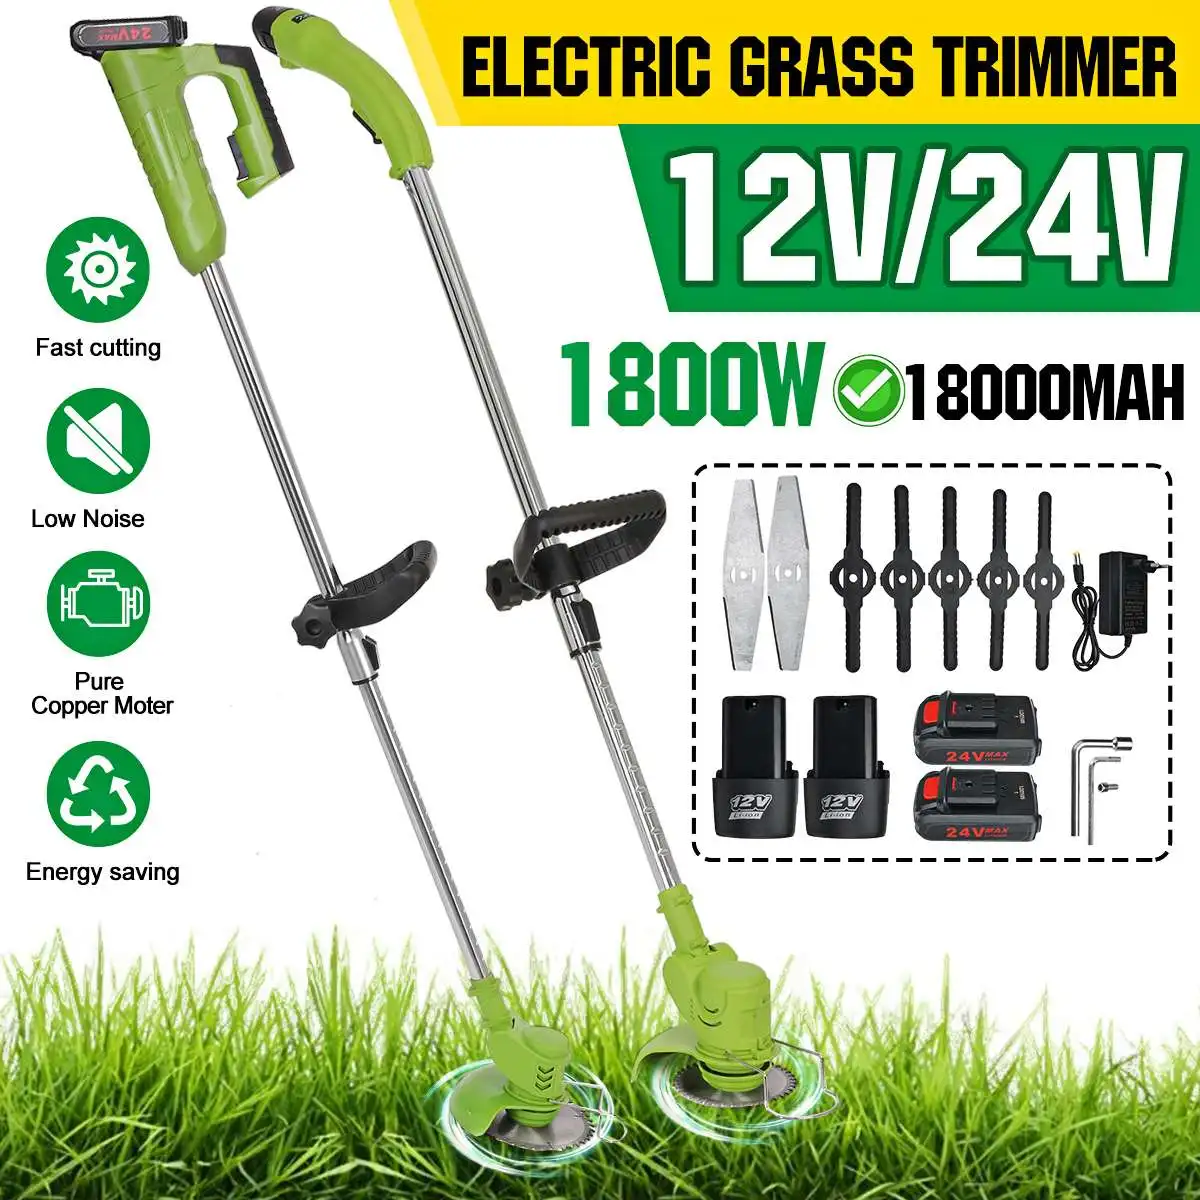 

1800W Cordless Lawn Mower 12V/24V Grass Trimmer Mowing Machine Grass Cutter Pruning Garden Power Tools With Li-ion Battery